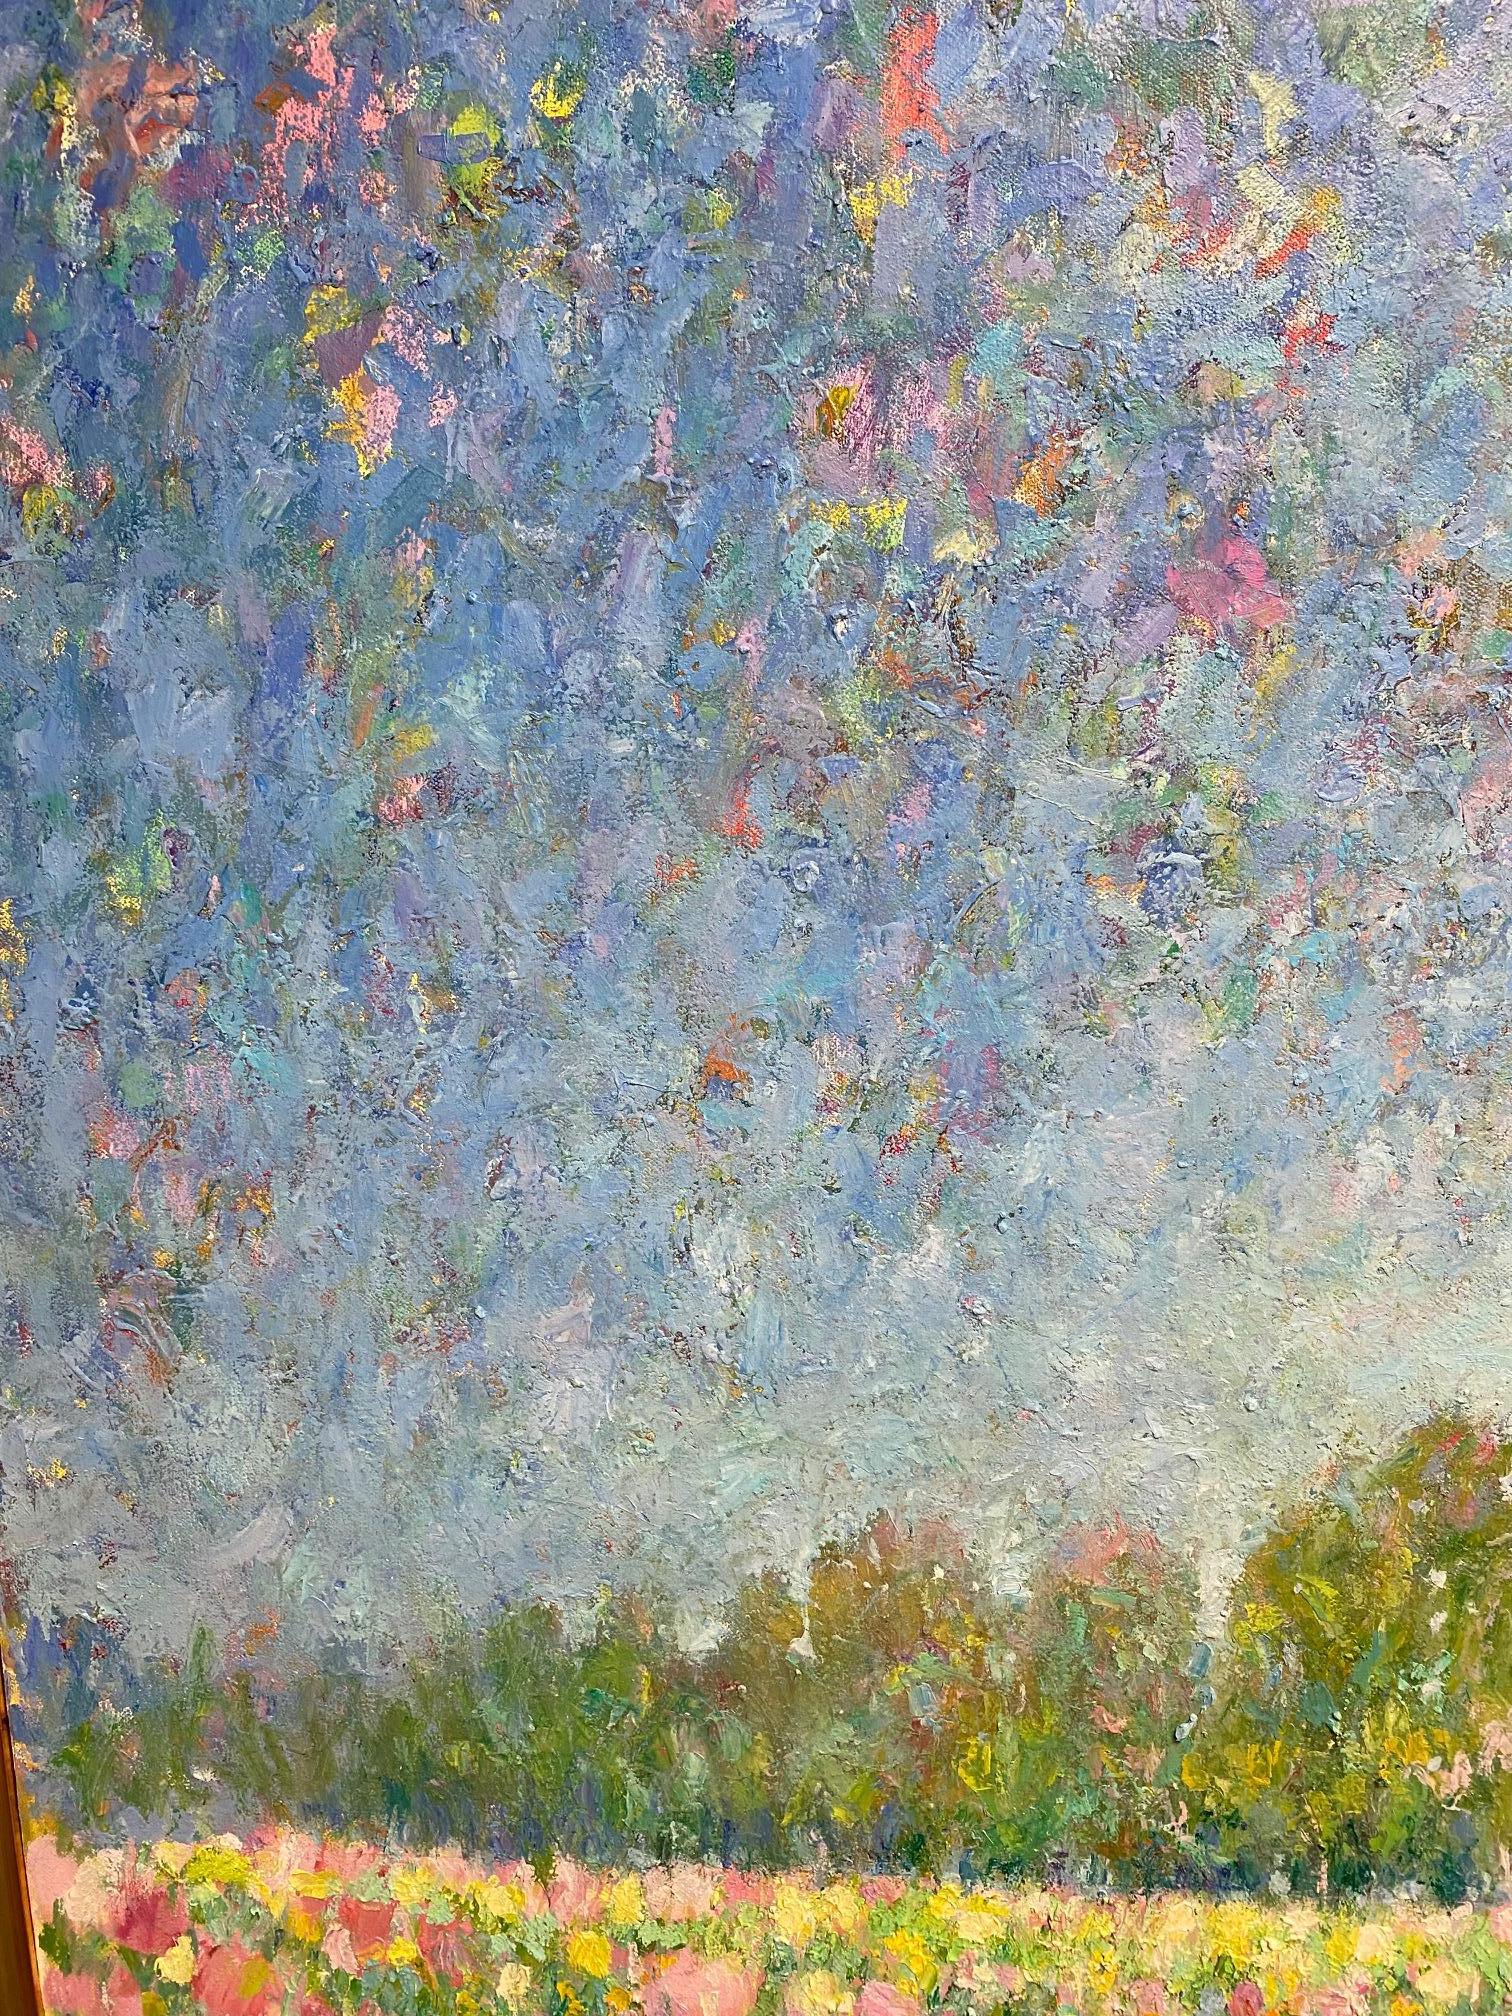 Reflections in the Sky, paysage expressionniste abstrait original 30x40 en vente 2